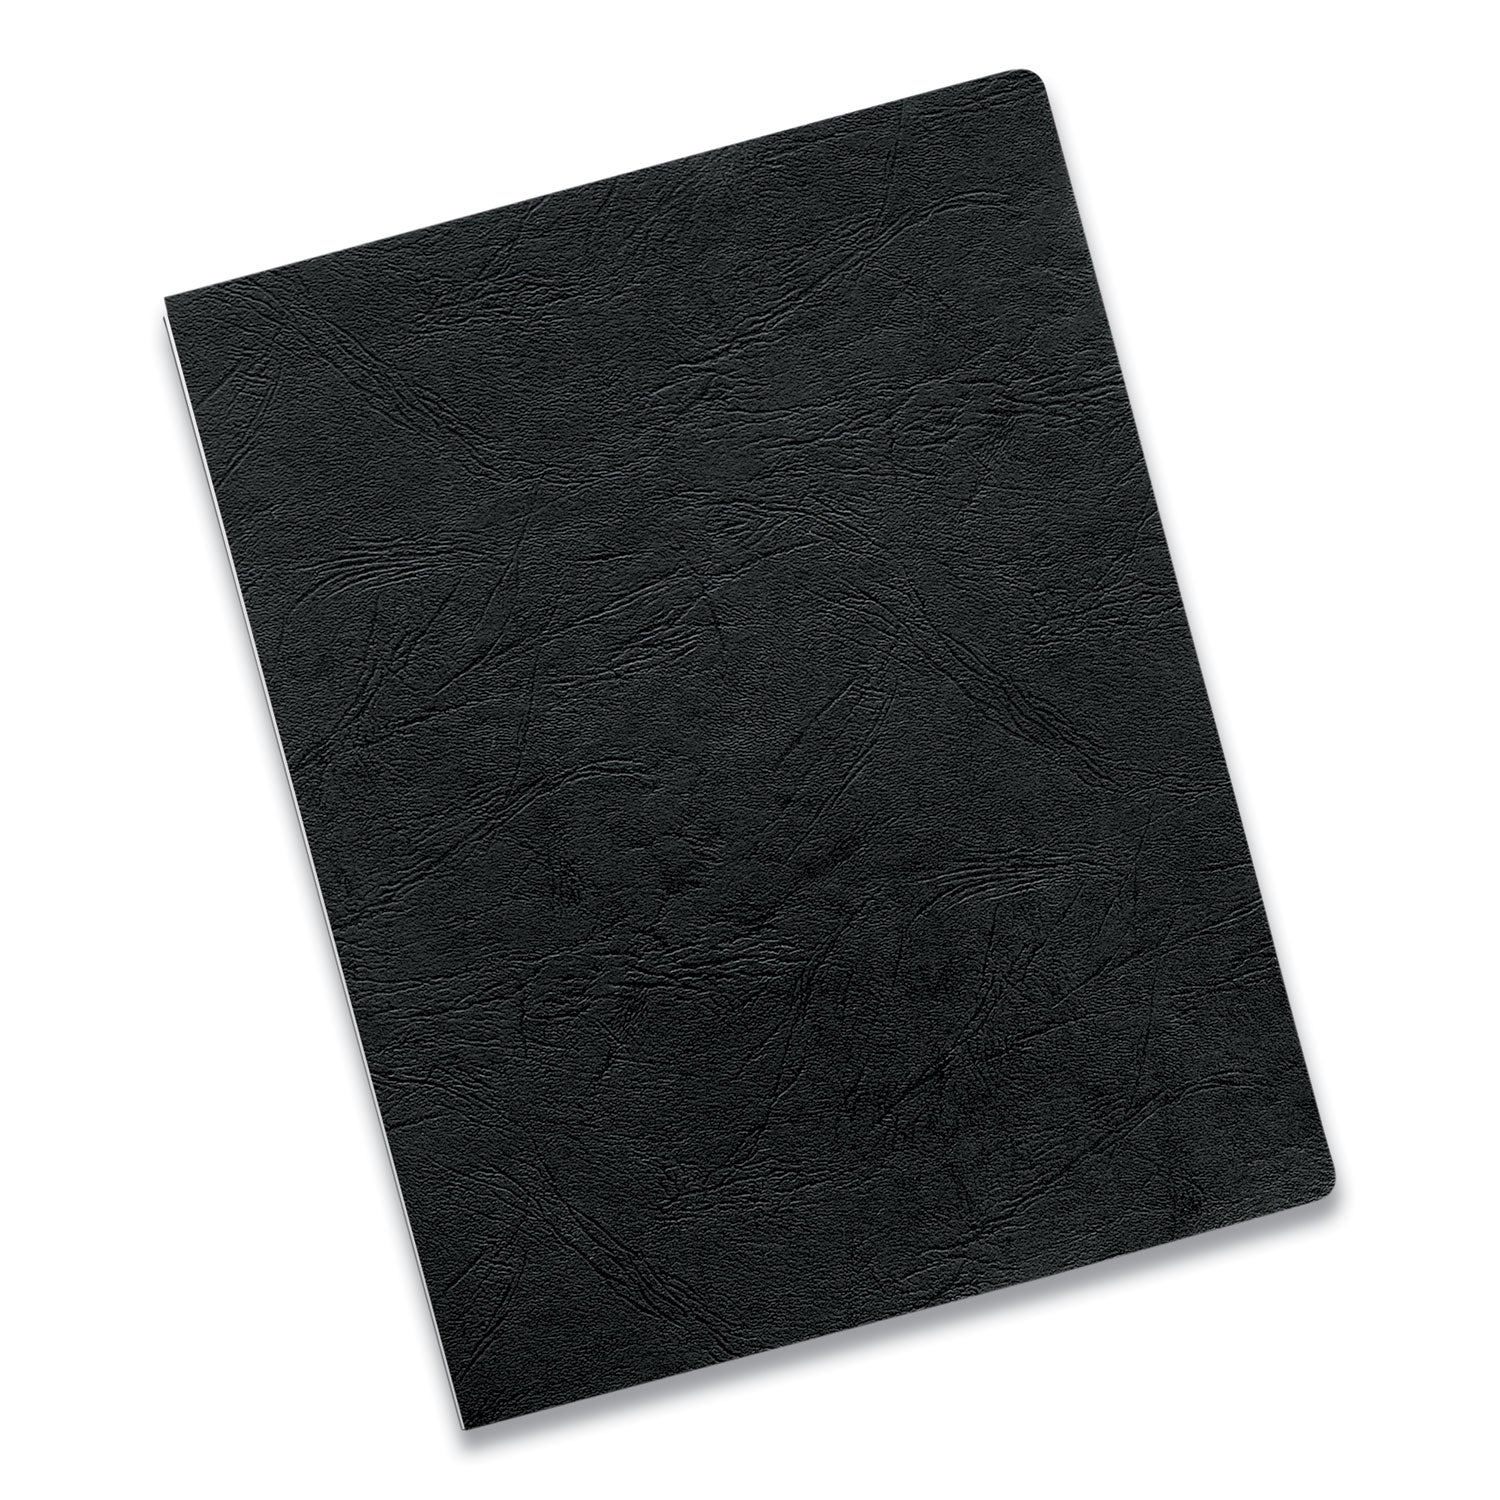 Executive Leather-Like Presentation Cover, Black, 11.25 x 8.75, Unpunched, 50/Pack - 